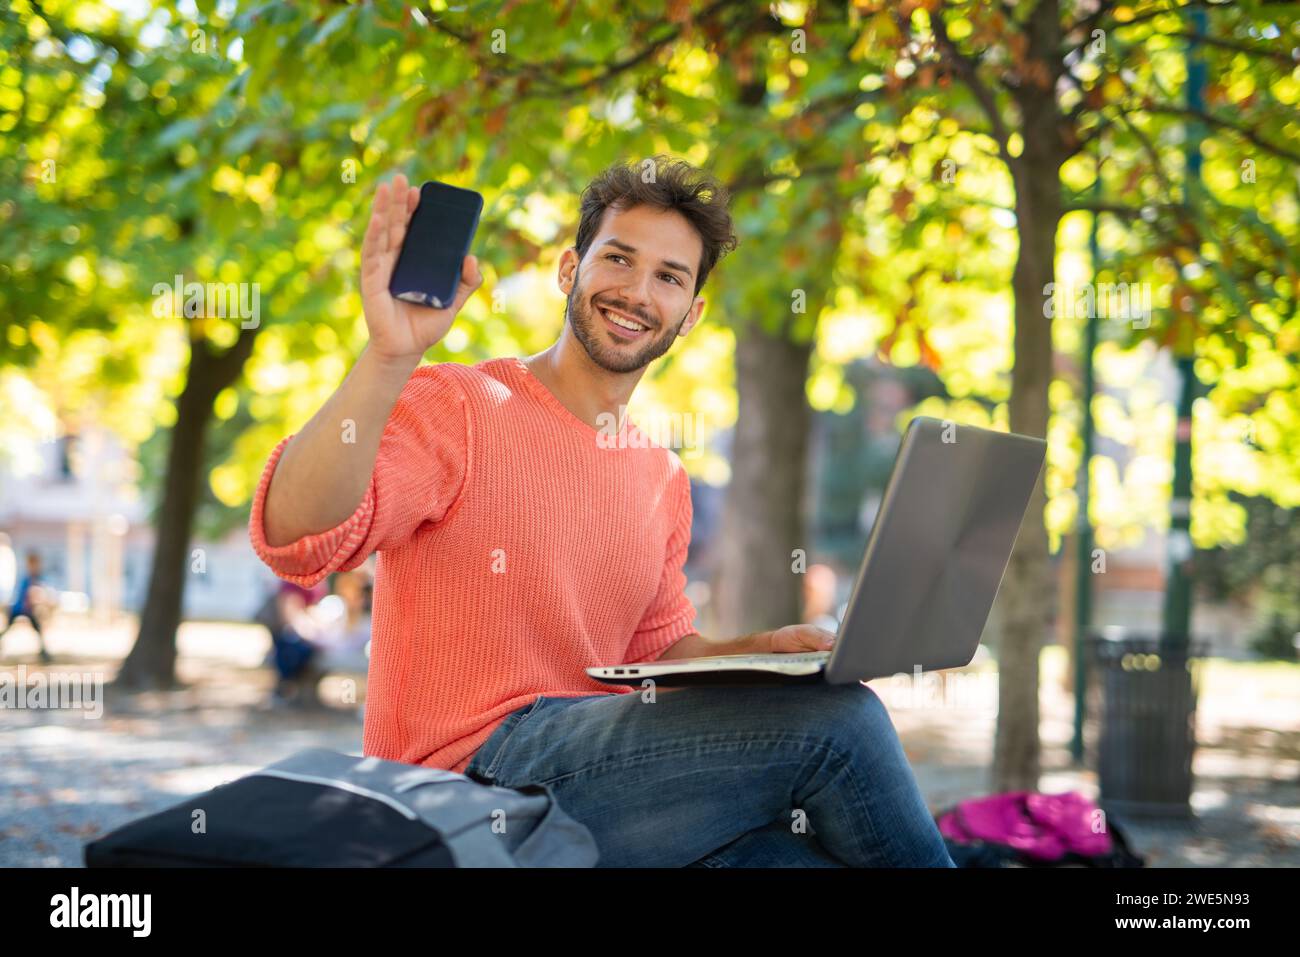 Young man using a laptop computer in a park while showing his cellphone, young people and technology concept Stock Photo